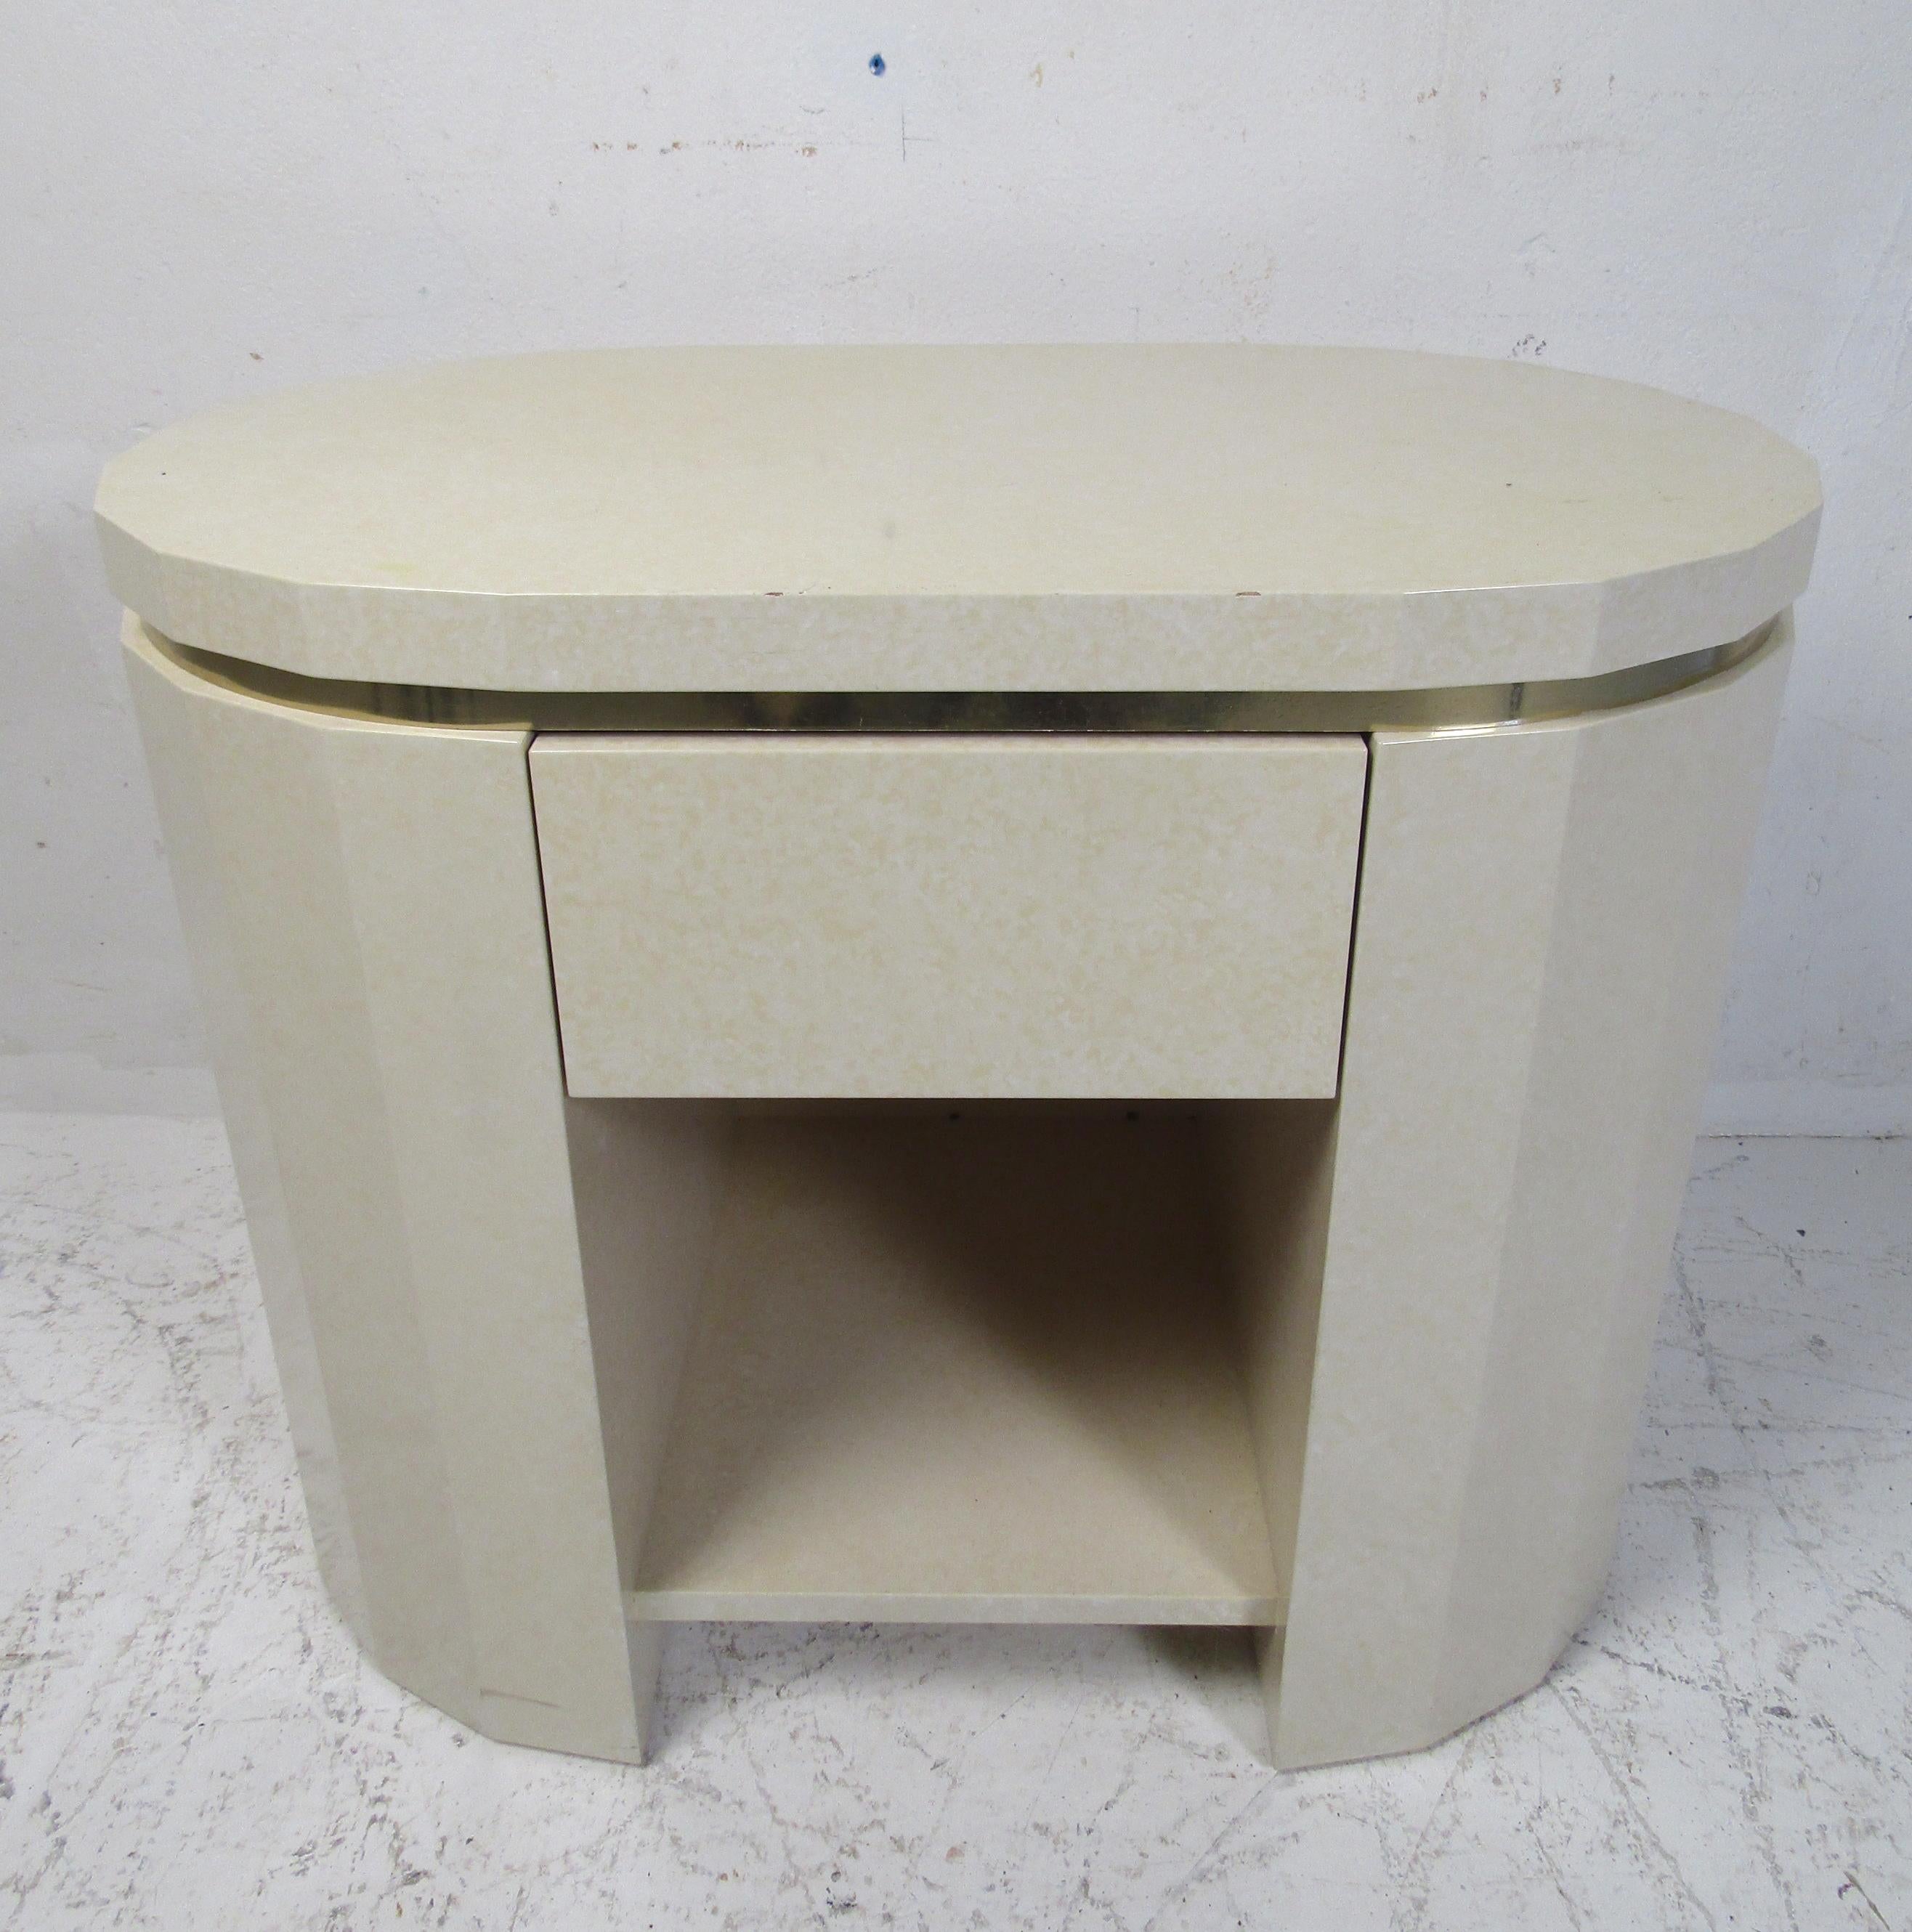 An unusual vintage modern nightstand with brass trim, a lacquered finish, and a large drawer. Perfect addition to any home, business, or office. Please confirm item location (NY or NJ).